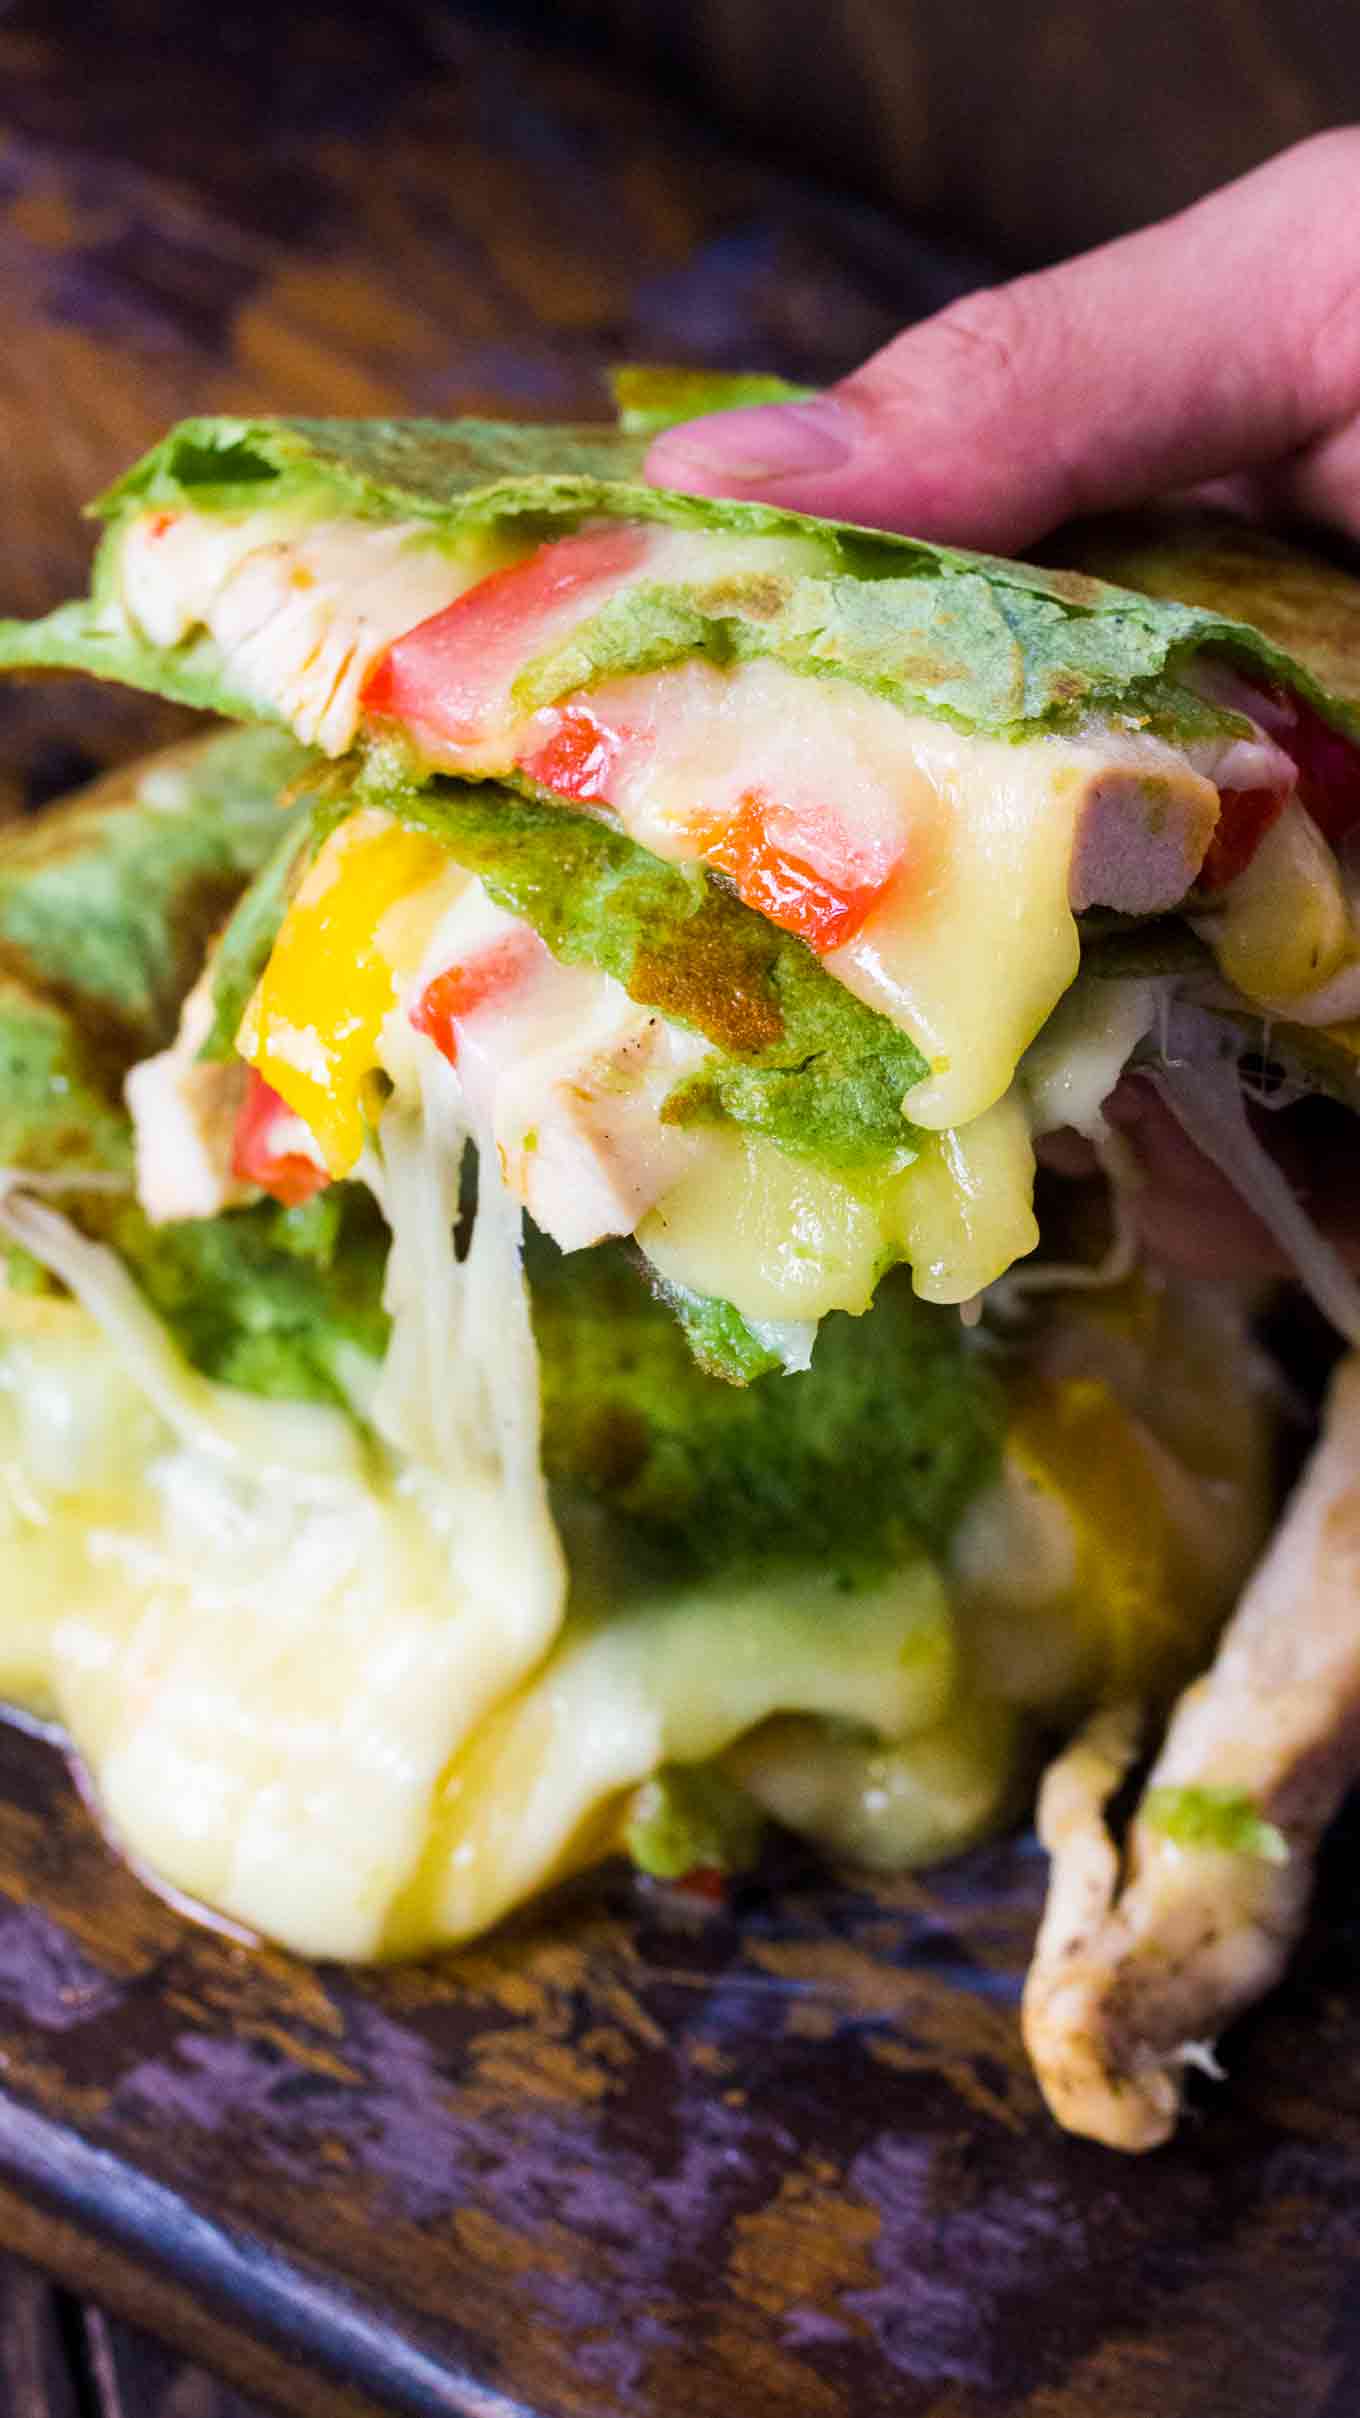 Cheesy Skillet Chicken Fajita Quesadilla is loaded with juicy and tender chicken meat, crunchy bell peppers and lots of delicious, melting cheese.